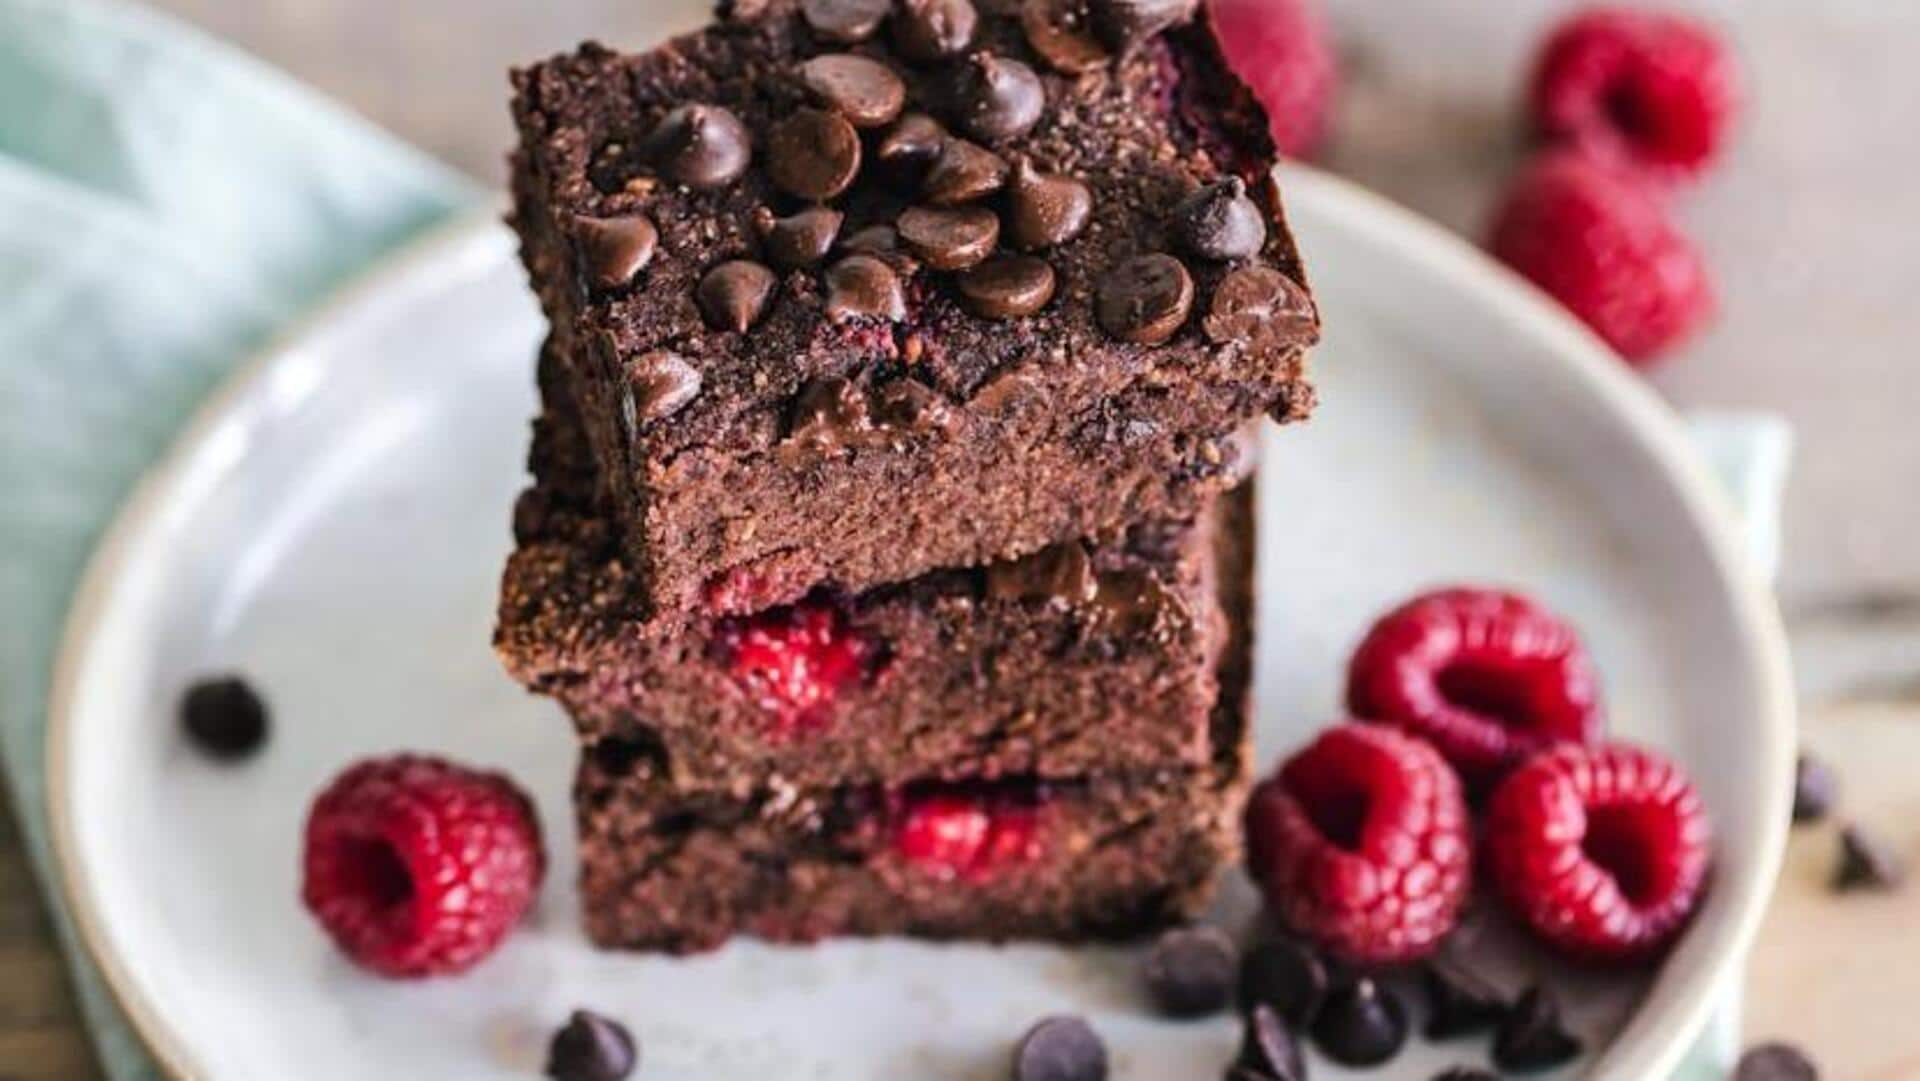 Satiate your sweet tooth with this vegan fudge brownie recipe